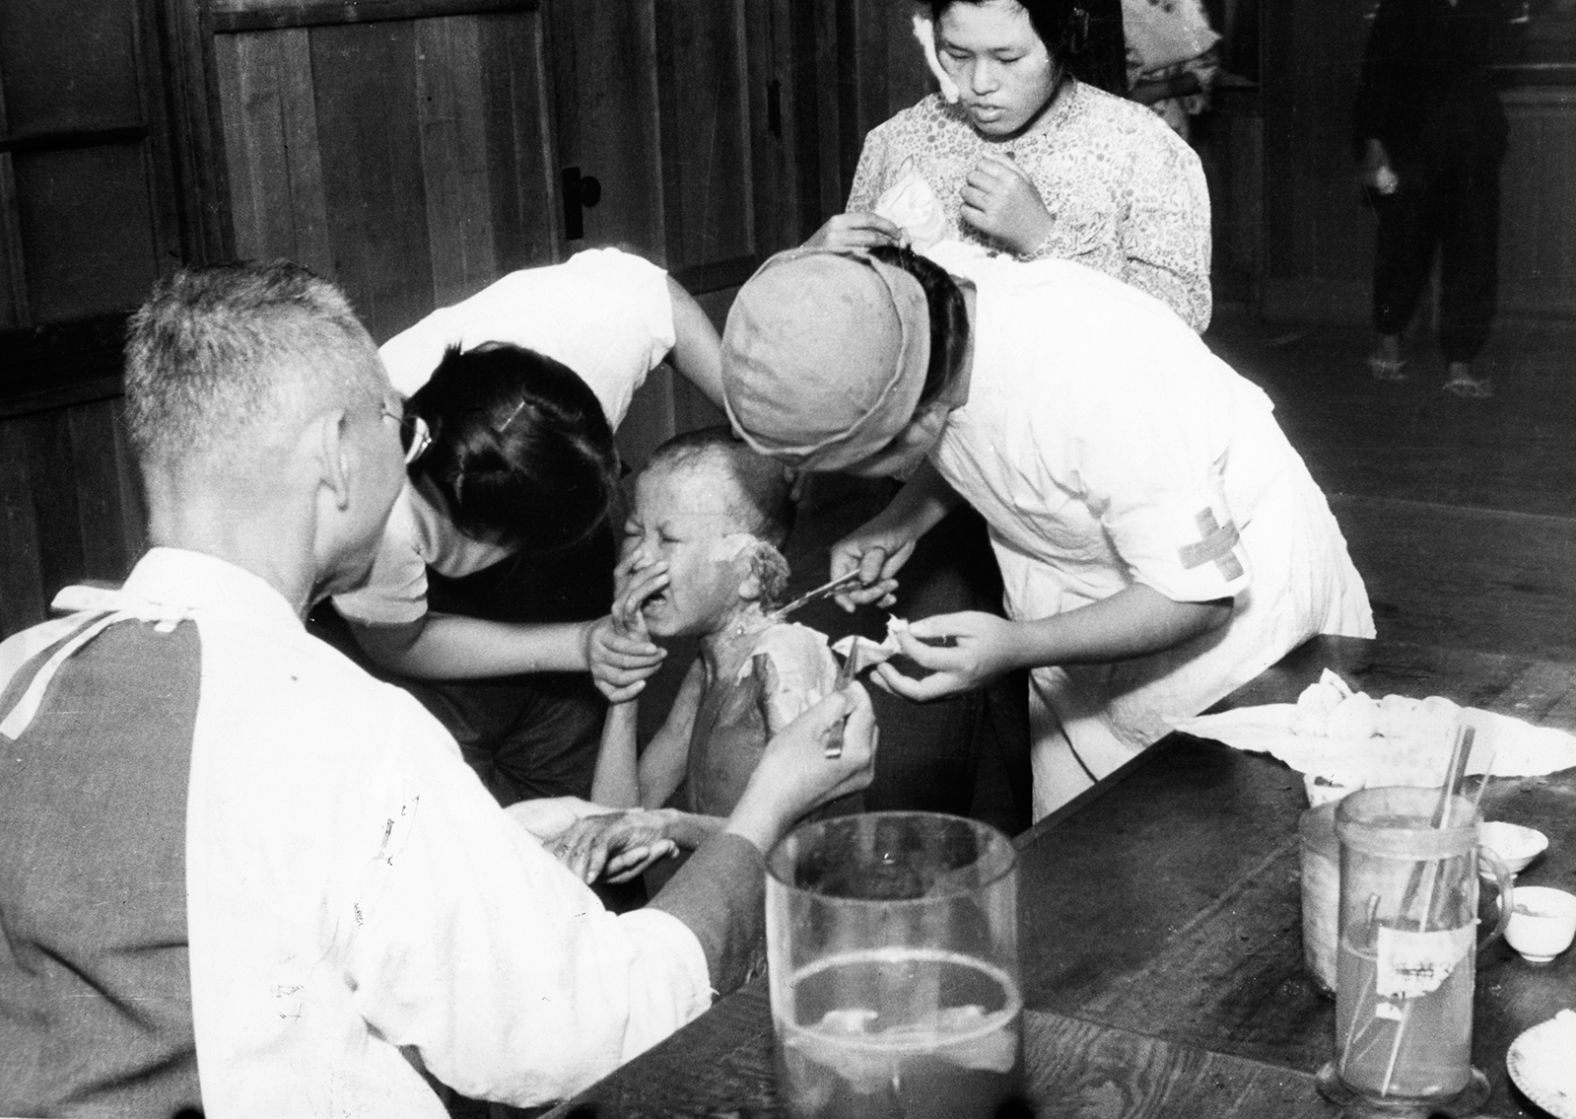 A young survivor cries as he receives treatment at a temporary hospital in Nagasaki.